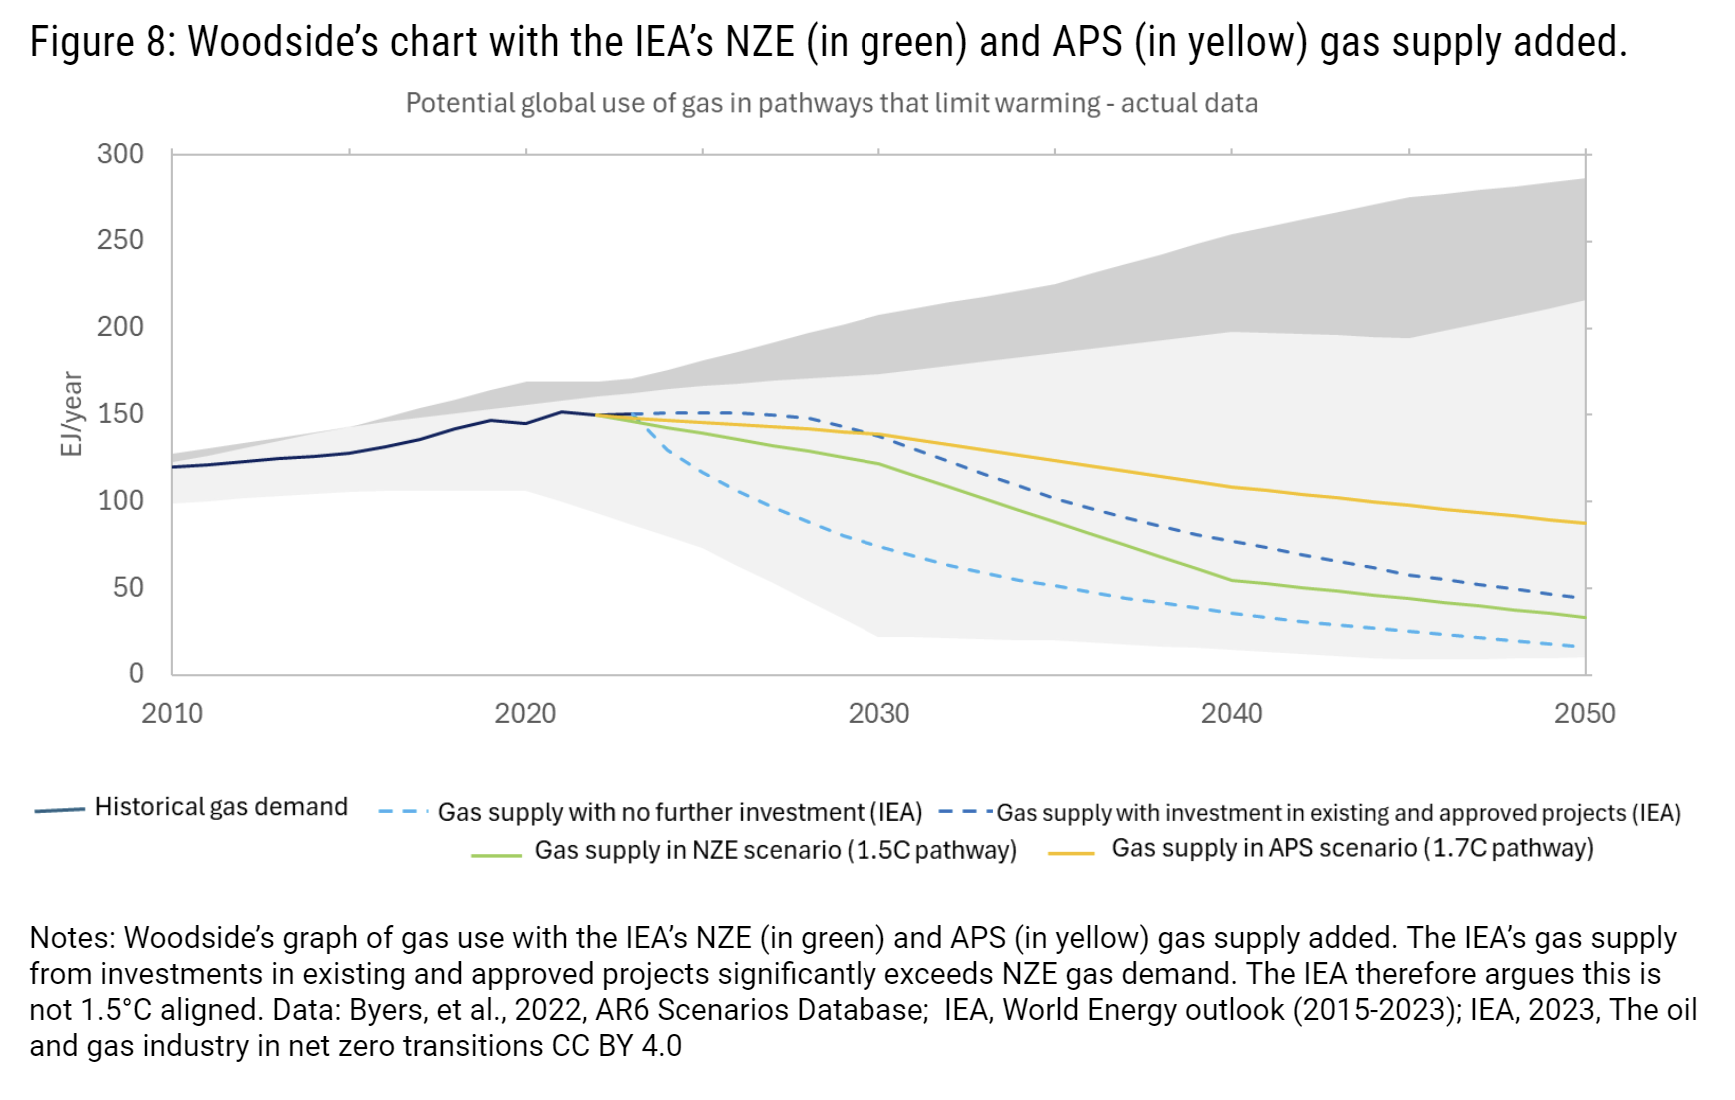 Woodside’s chart with the IEA’s NZE (in green) and APS (in yellow) gas supply added.